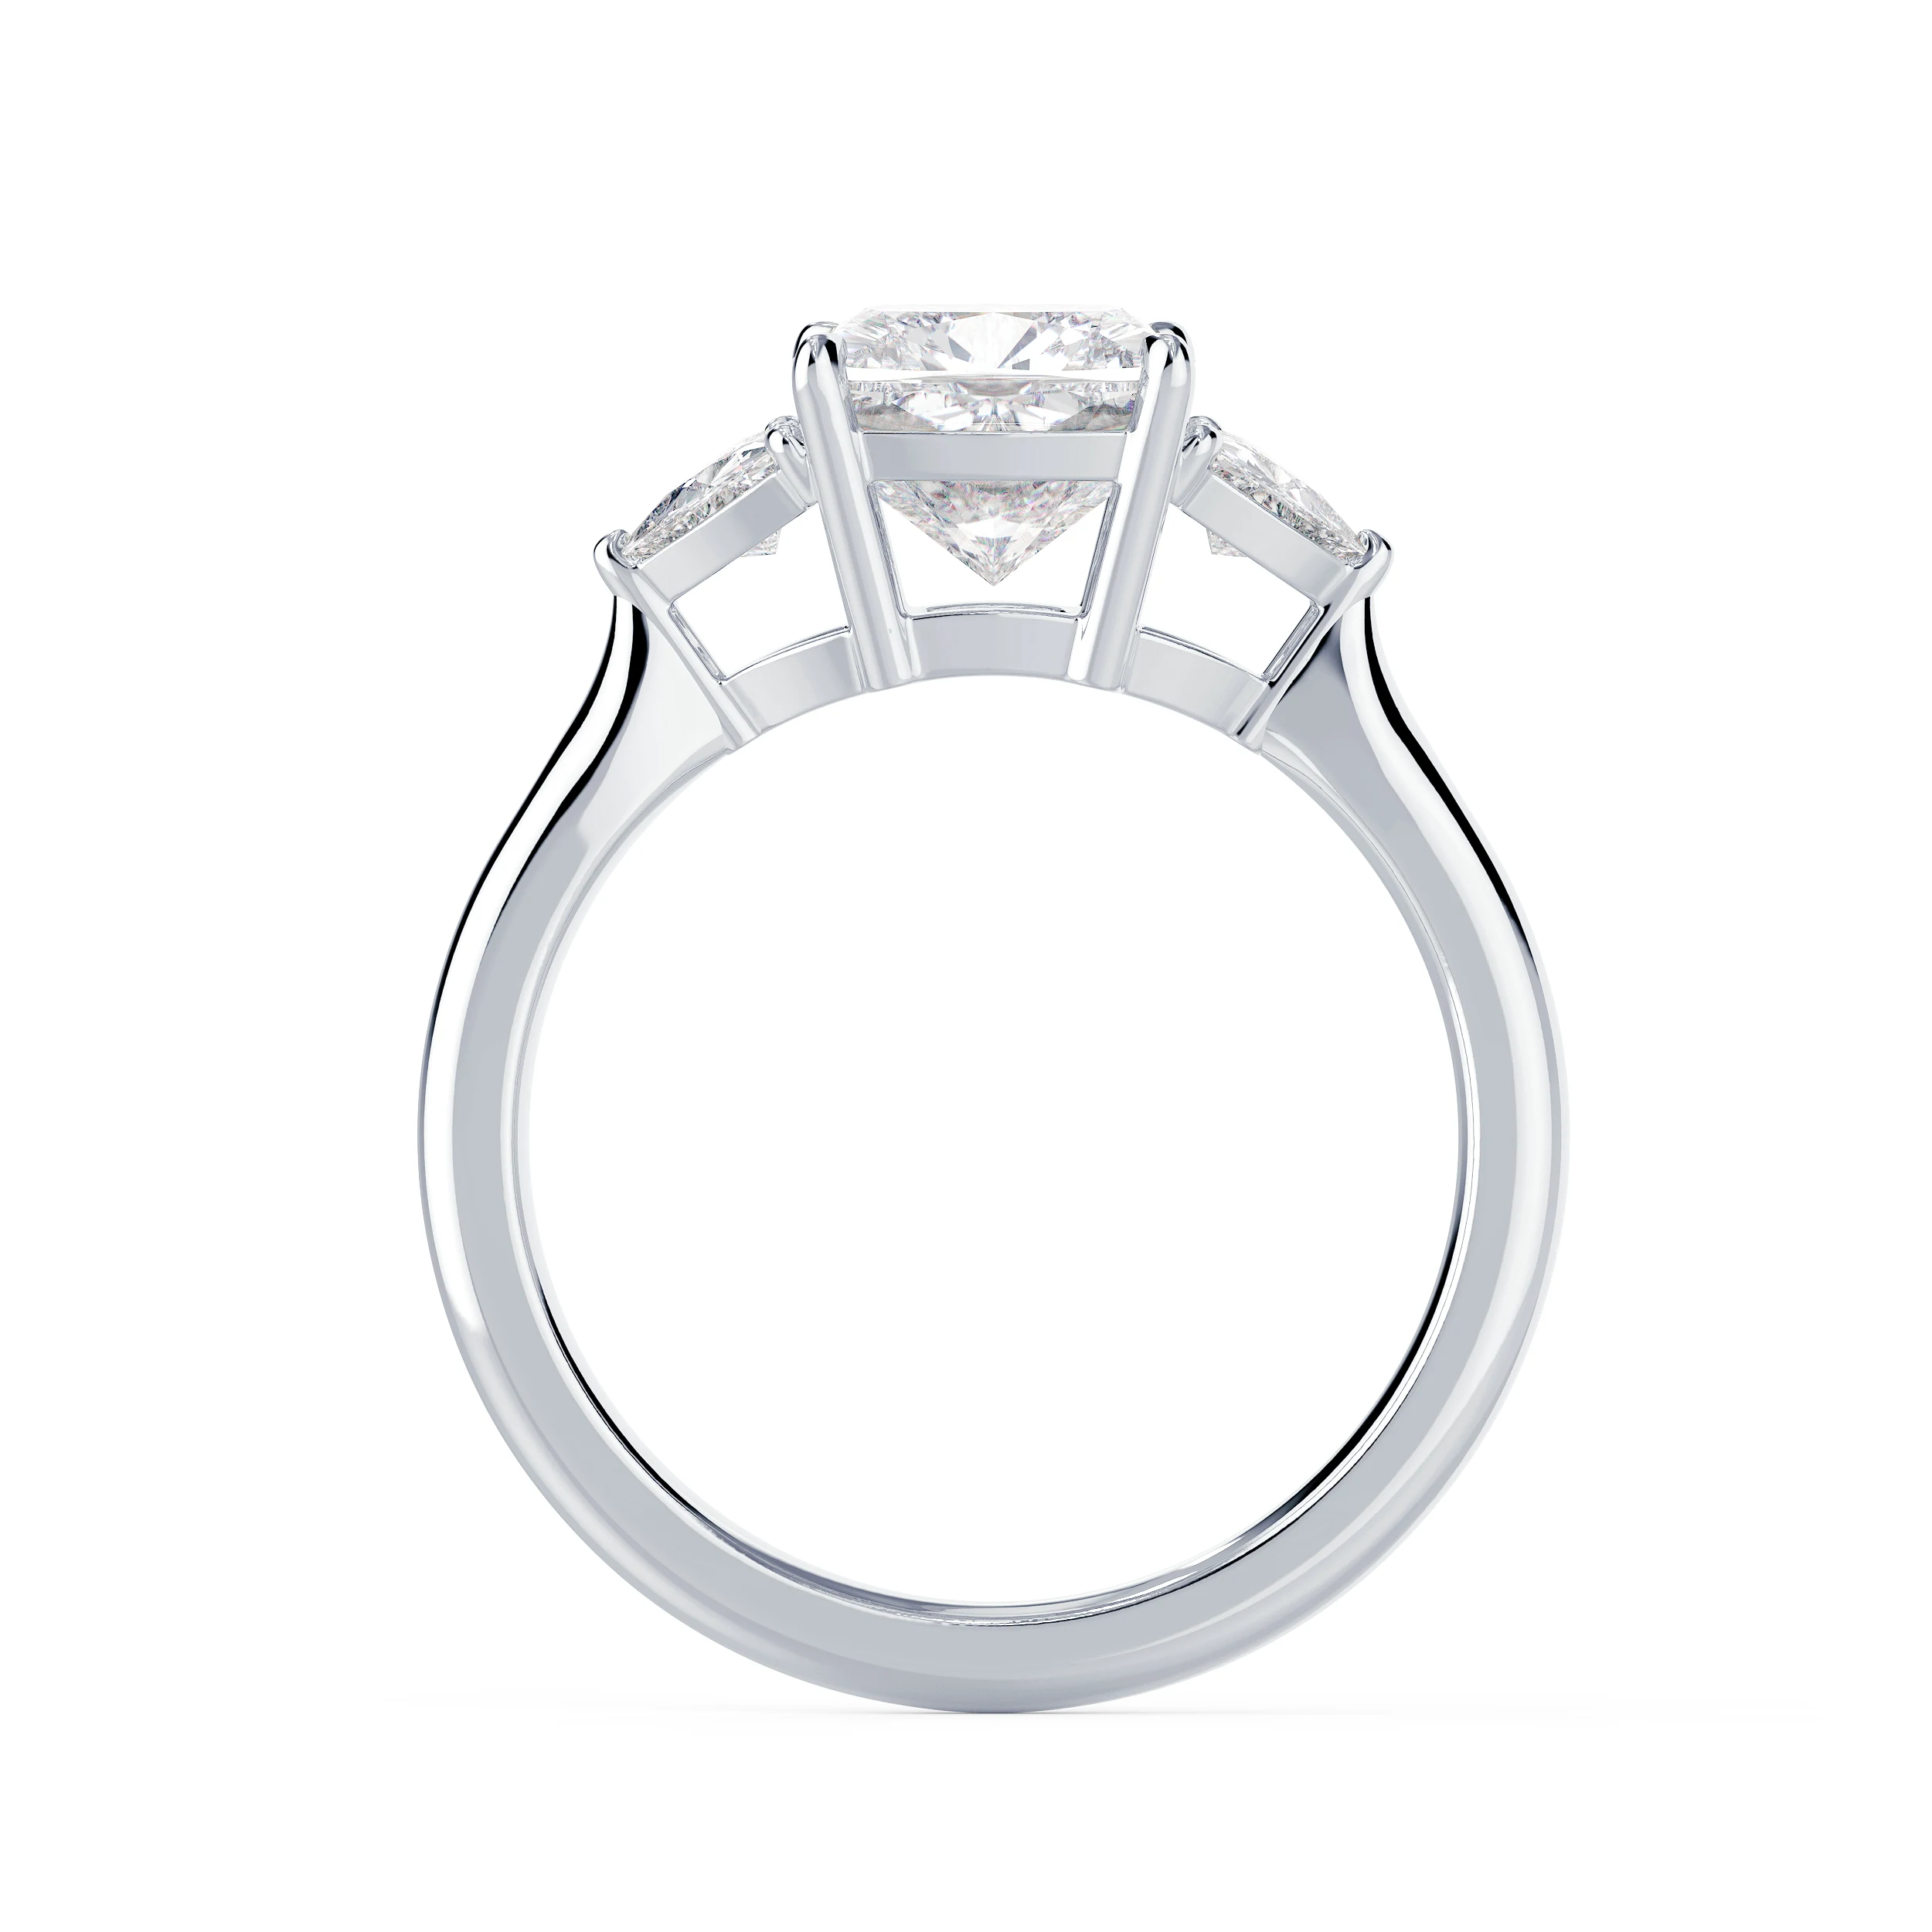 High Quality Lab Diamonds set in White Gold Cushion and Trillion Setting (Profile View)